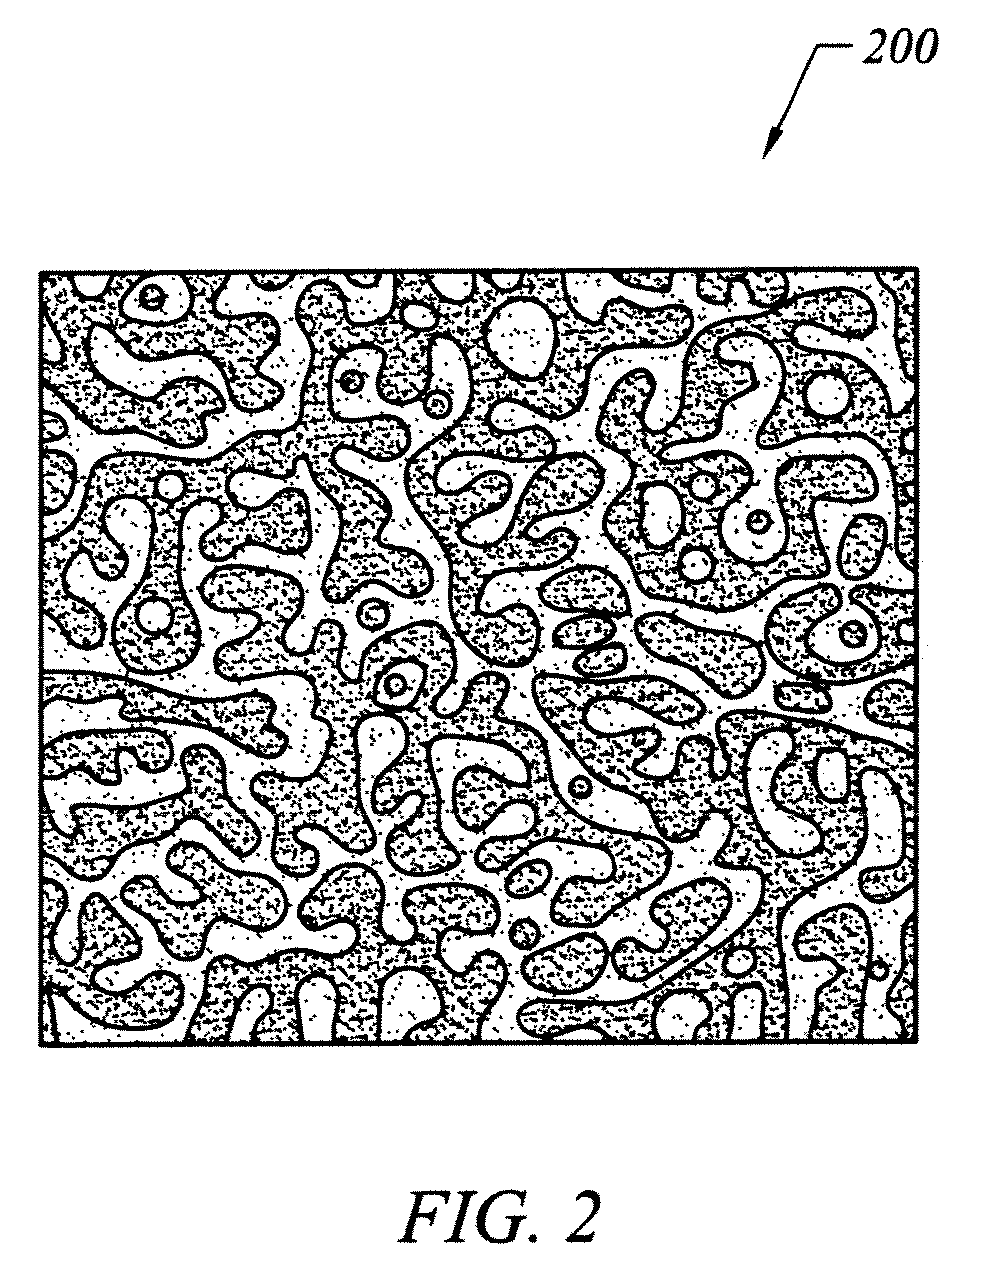 Authenticating and identifying objects using markings formed with correlated random patterns